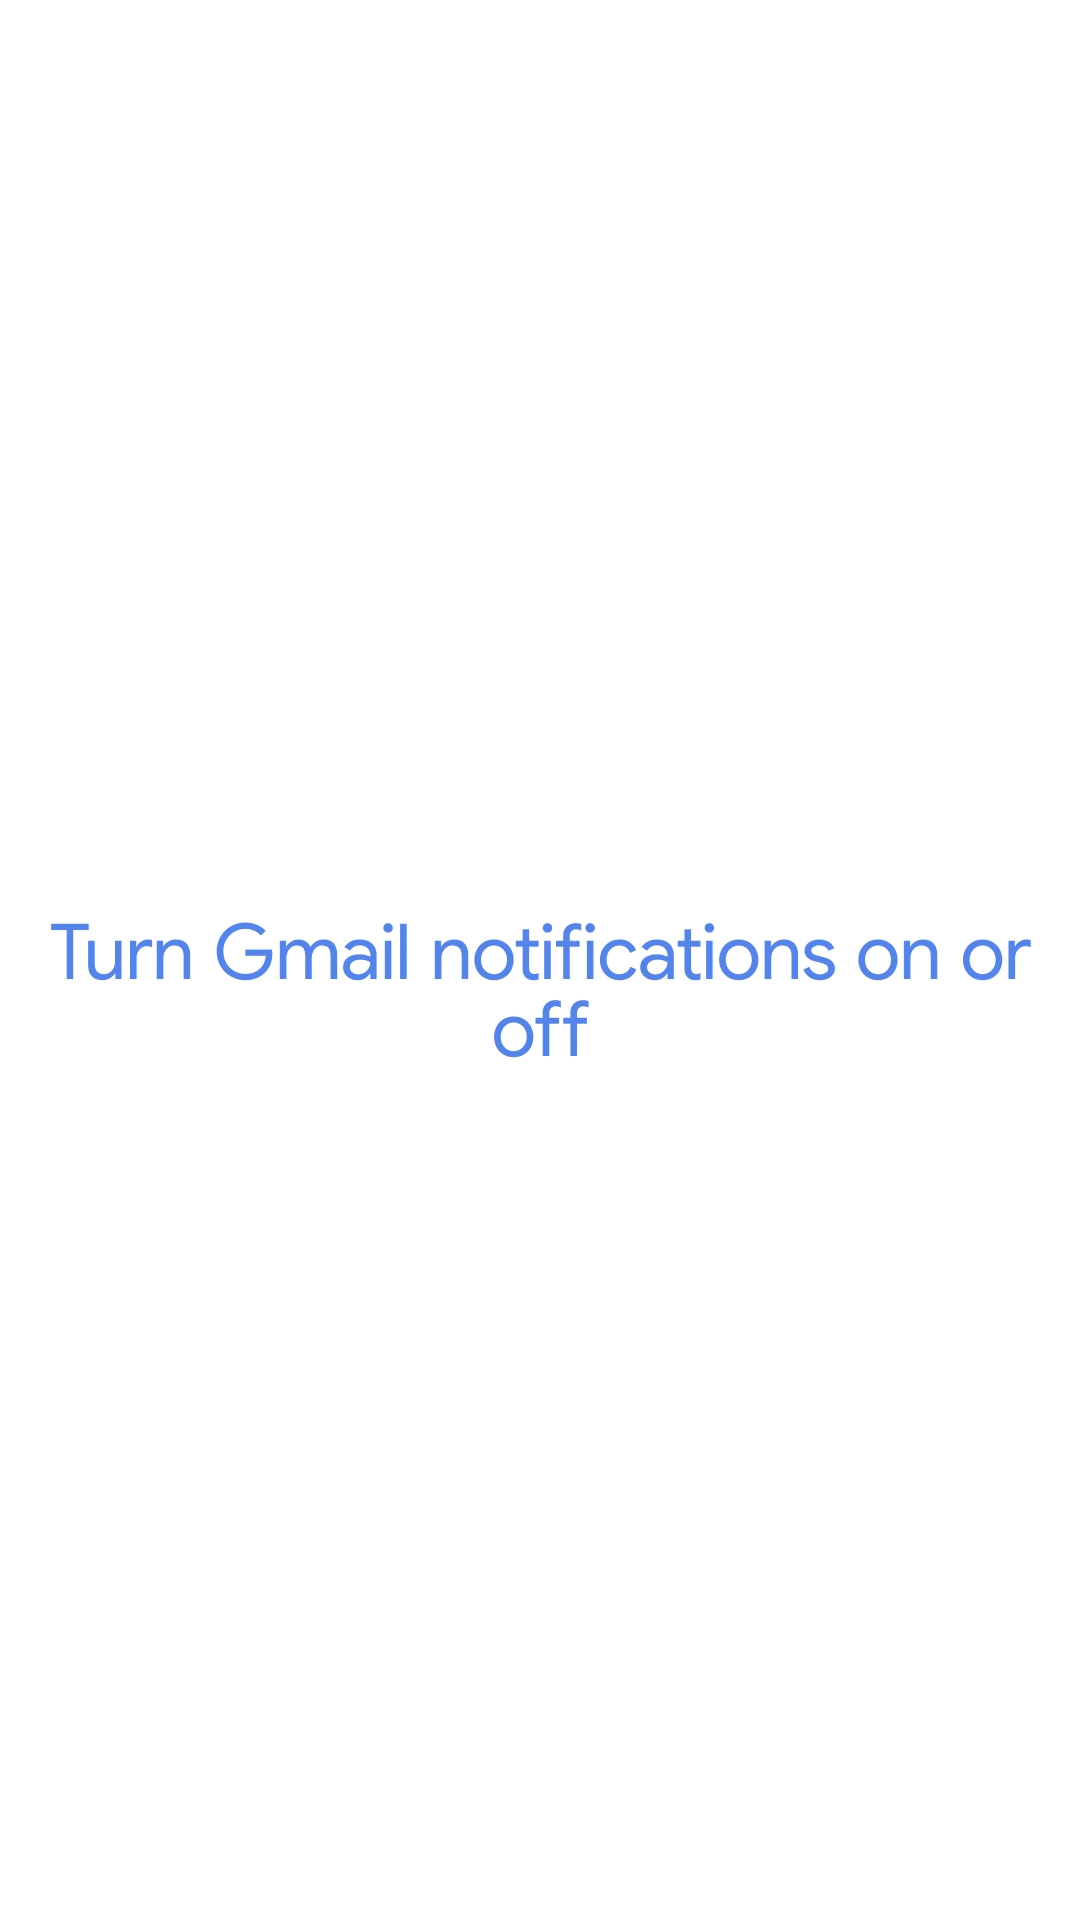 An animation showing how to turn Gmail notifications on or off on iOS